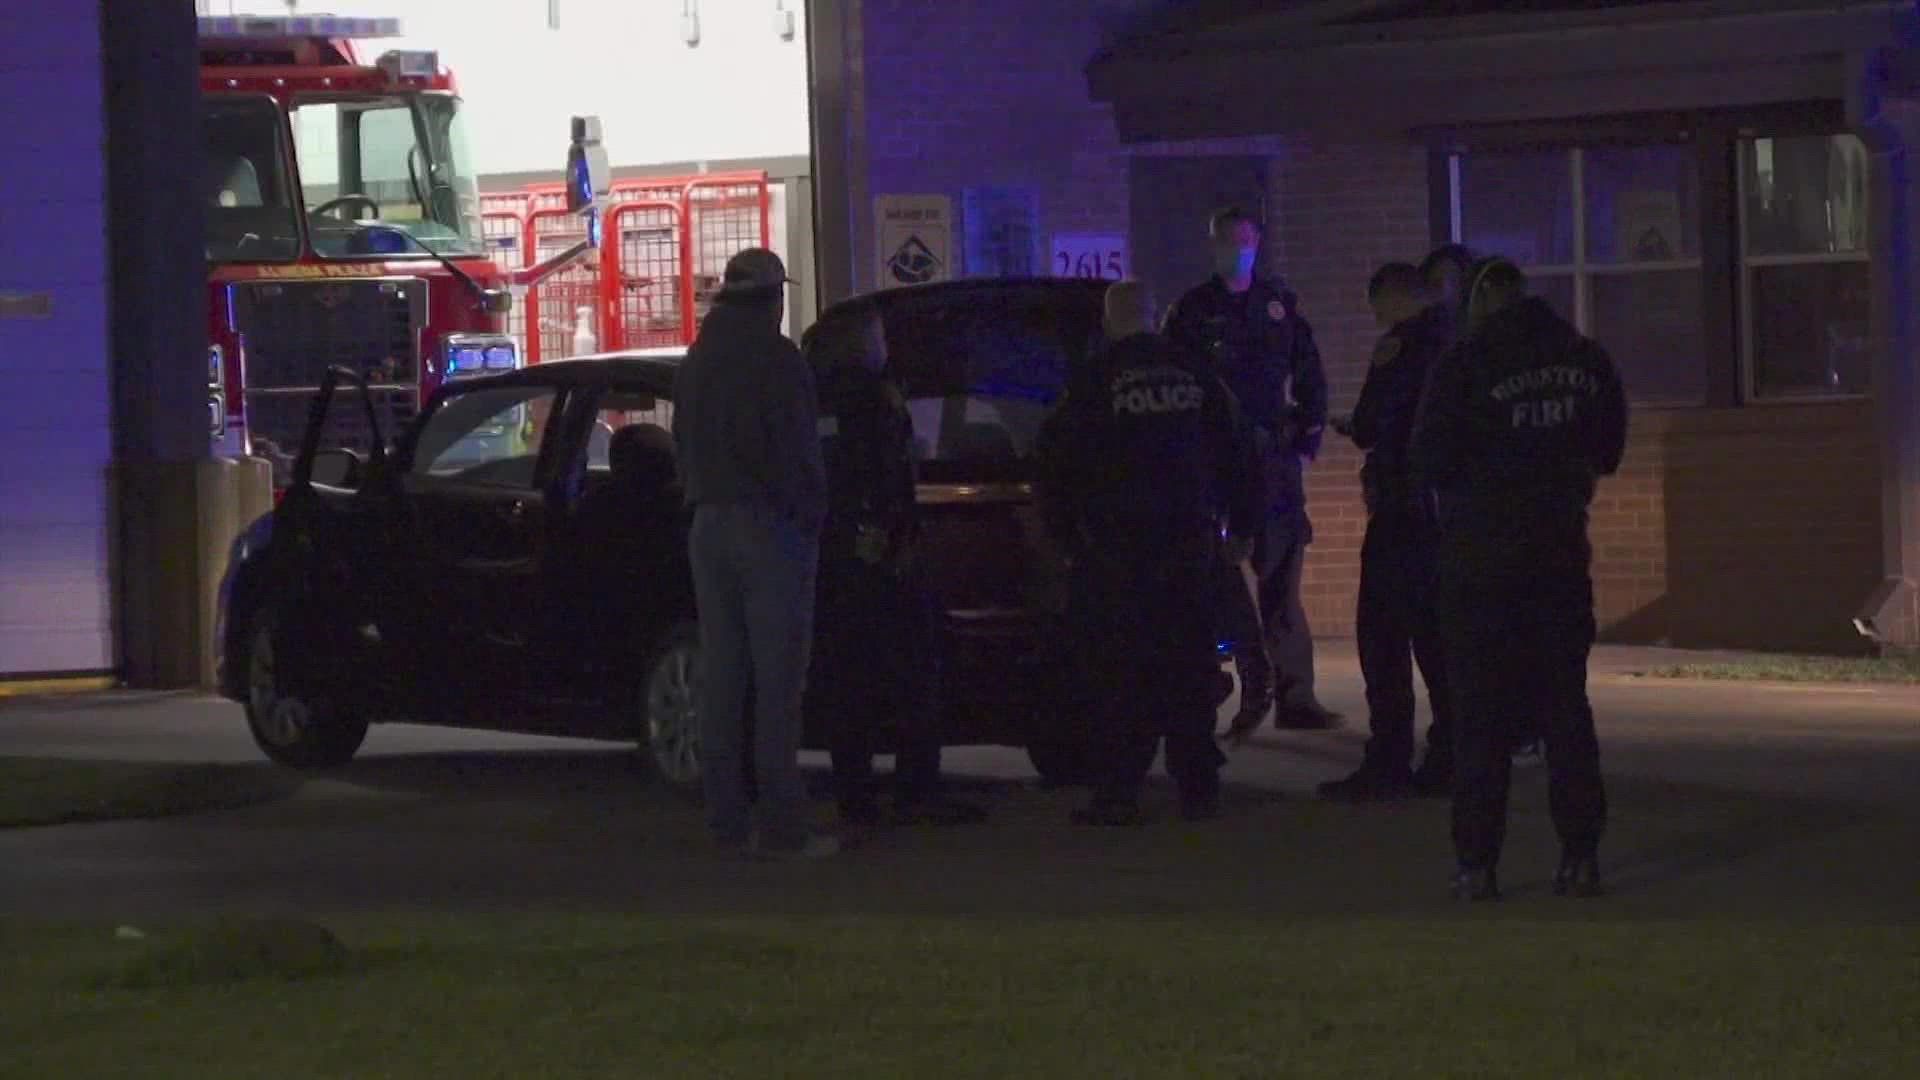 A woman was shot during a robbery on the southside, according to Houston police.